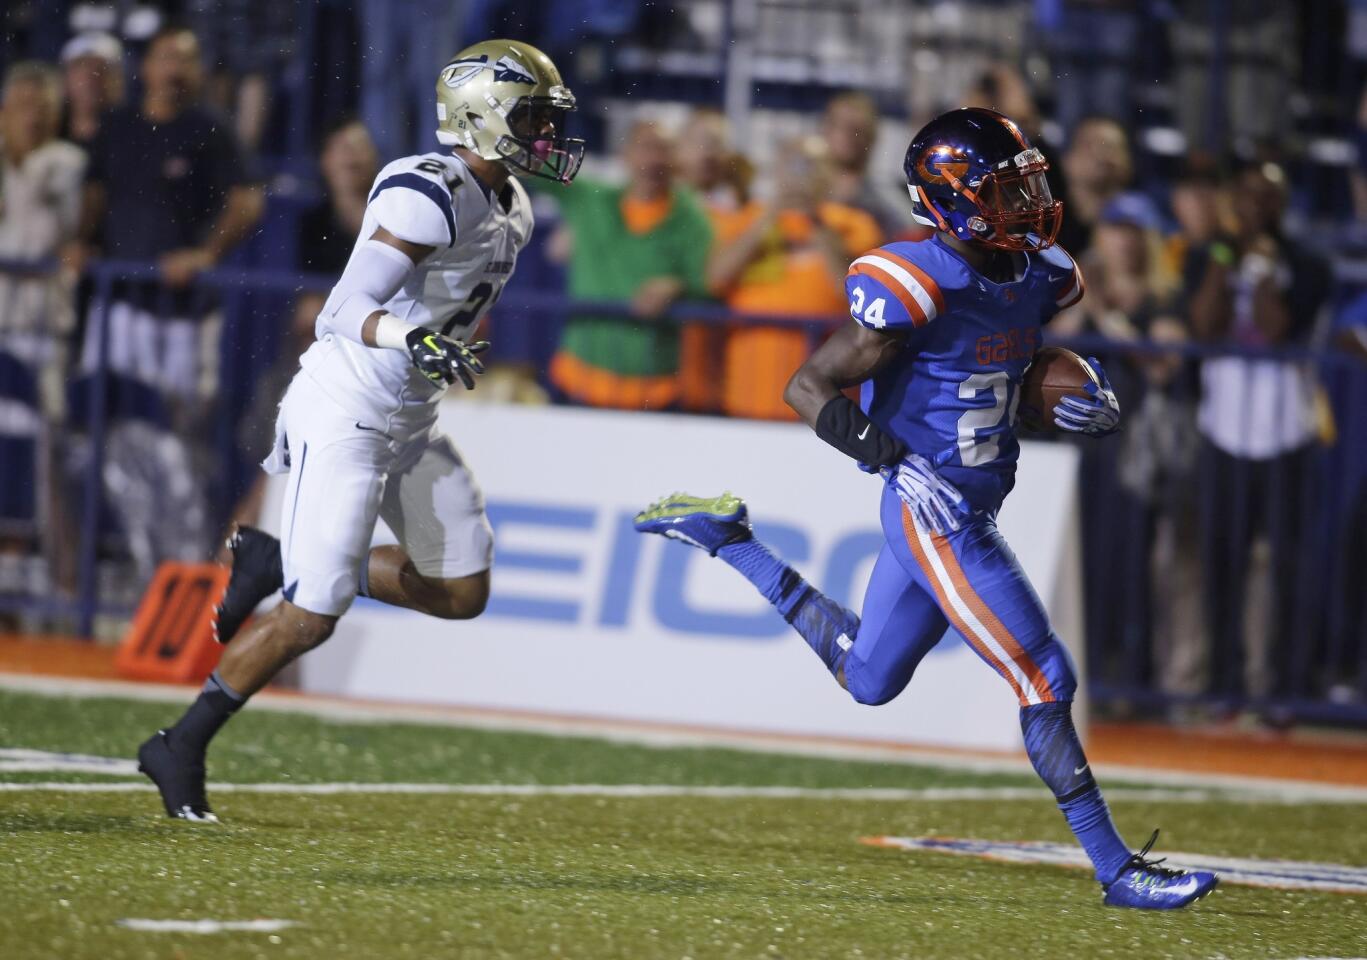 Bishop Gorman running back Russell Booze finishes off an 80-yard touchdown run against defensive back Mykal Tolliver and St. John Bosco in the first half.